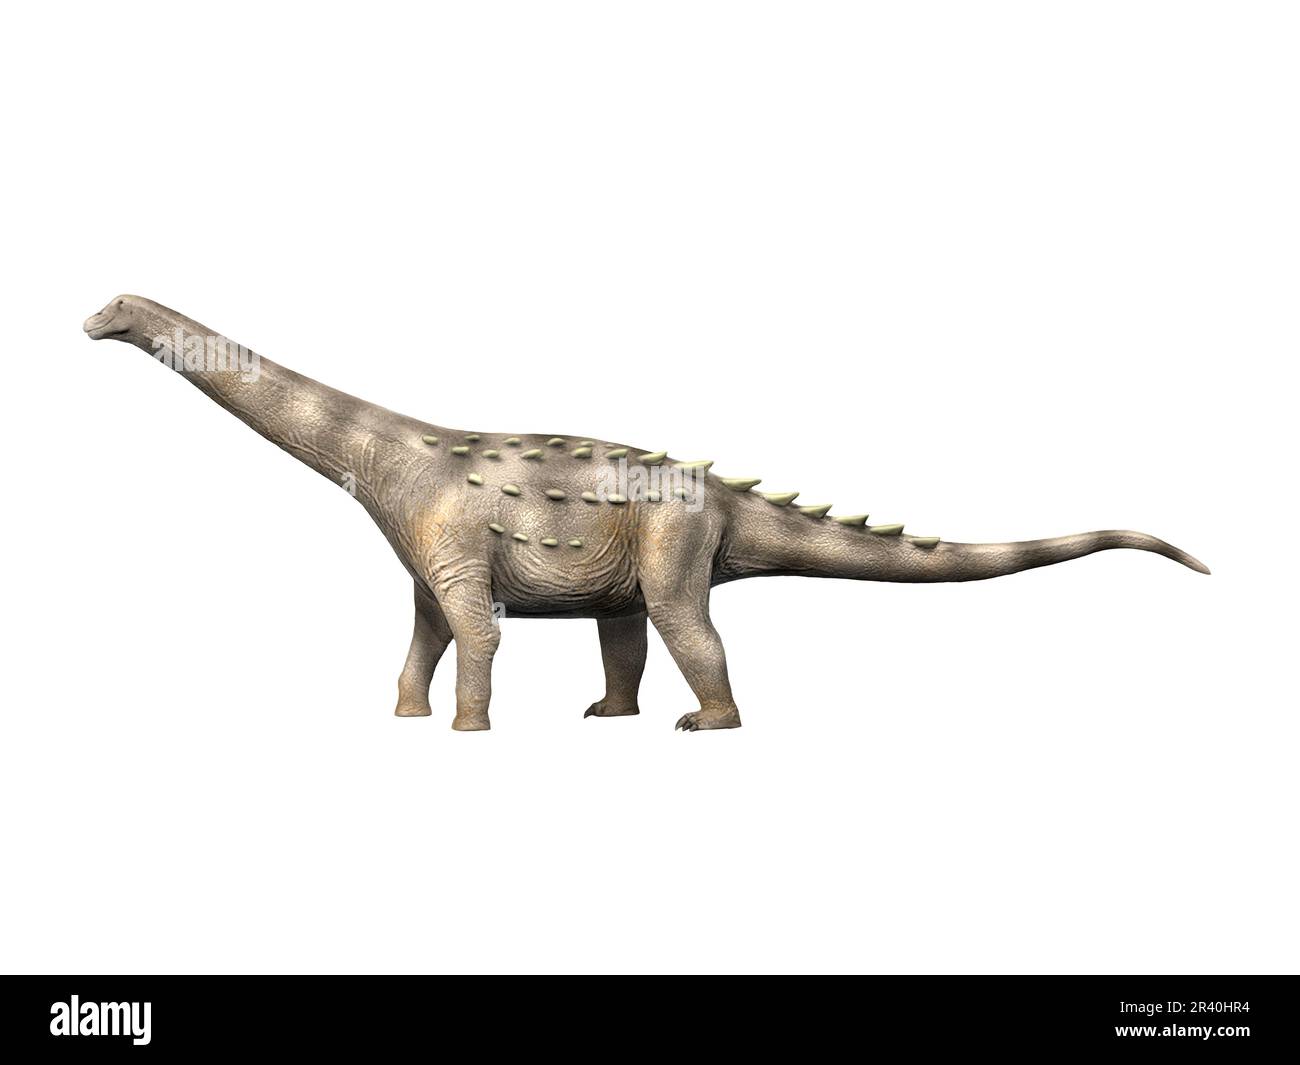 Opisthocoelicaudia, a sauropod dinosaur from the Late Cretaceous period. Stock Photo